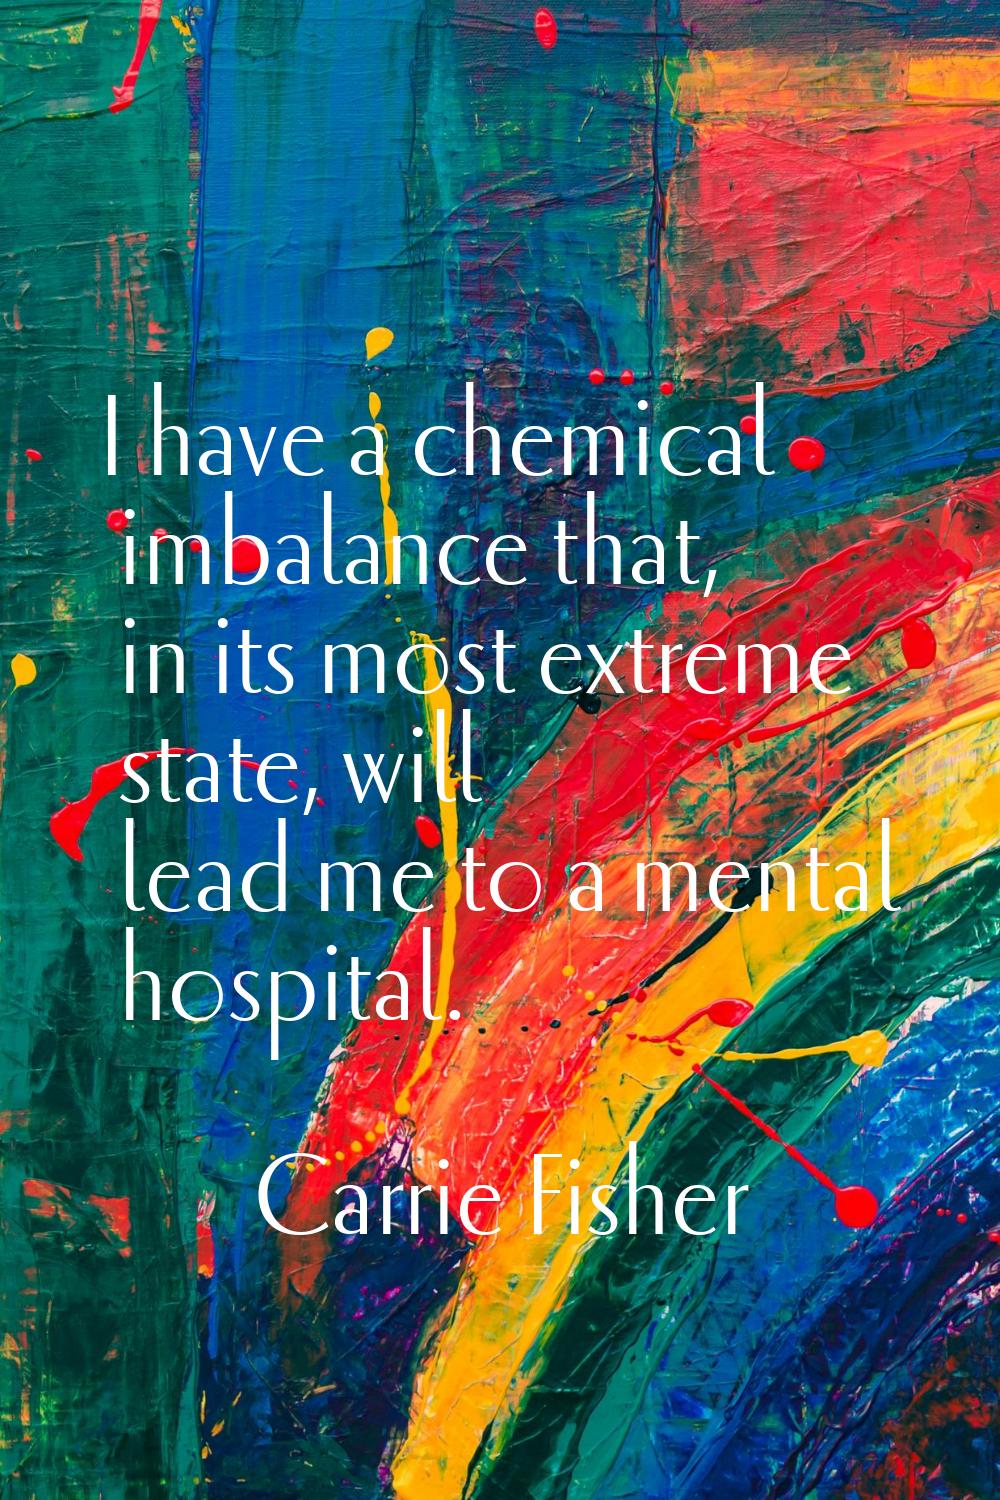 I have a chemical imbalance that, in its most extreme state, will lead me to a mental hospital.